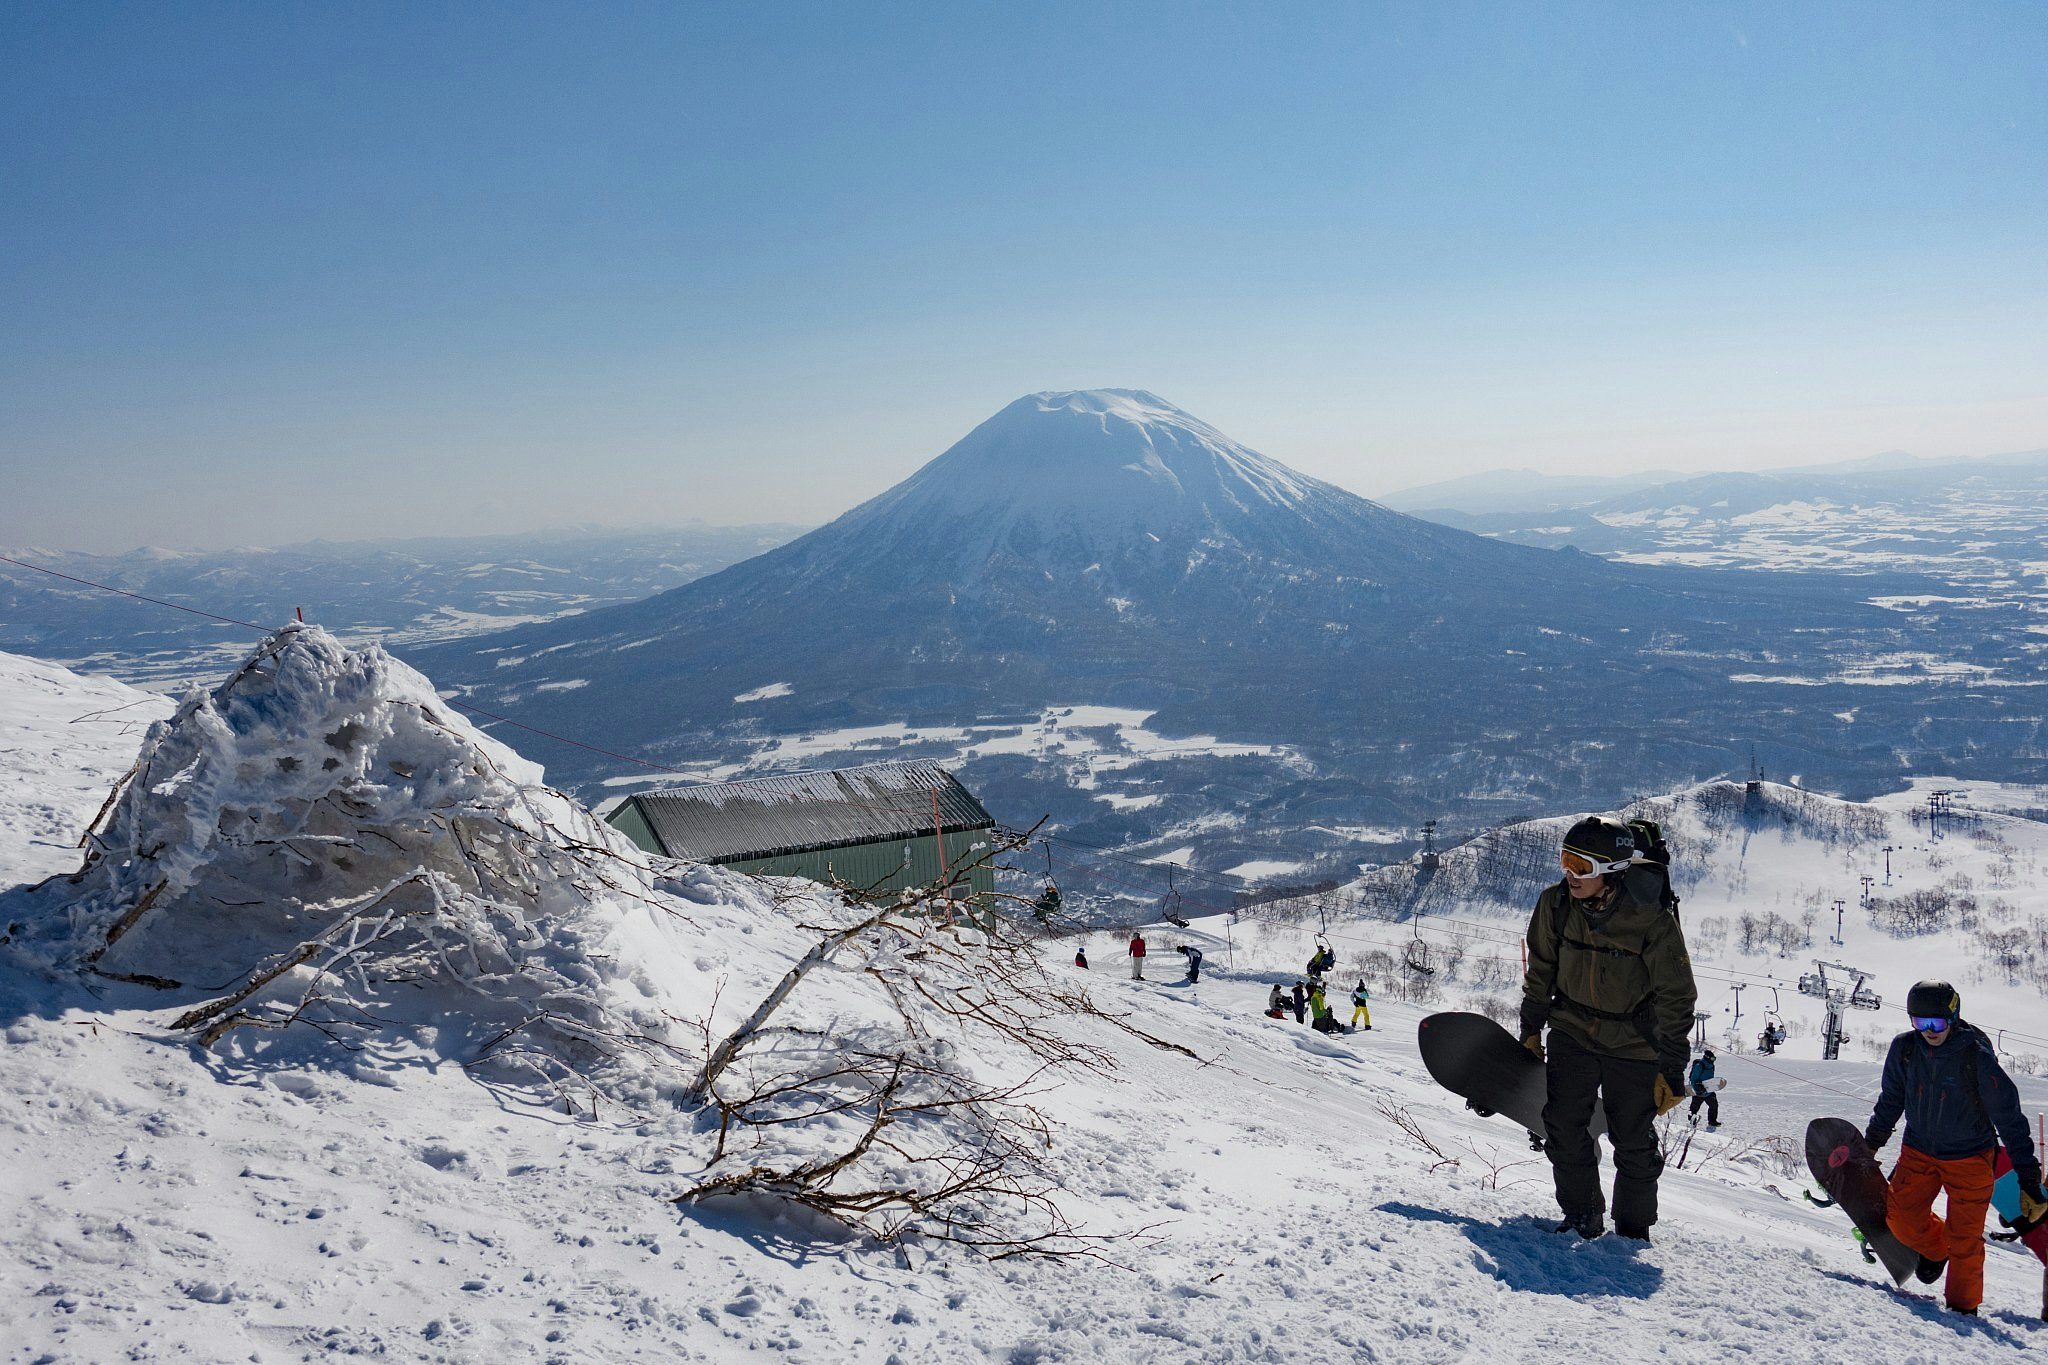 Snowboarders hike up a trail at Niseko ski resort on Mt Annupuri, Hokkaido, with another snow-covered mountain in the distance.